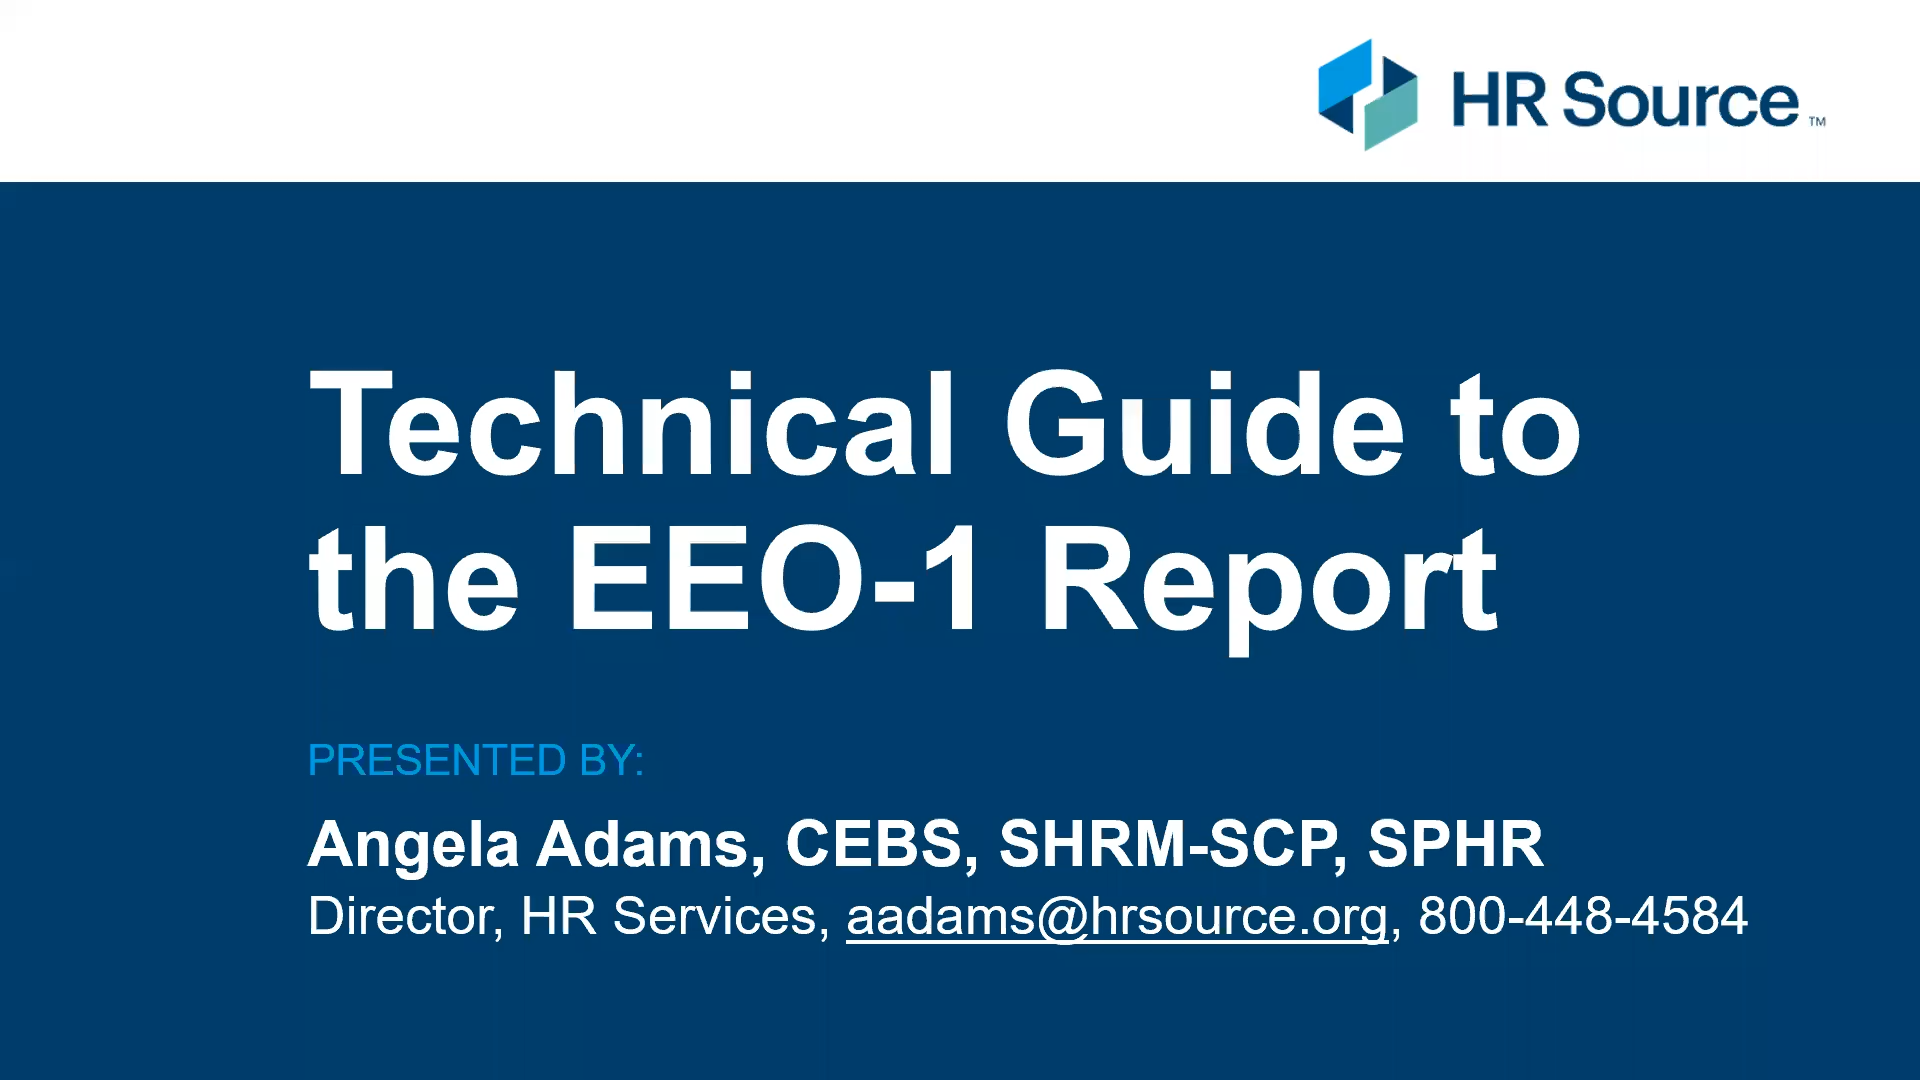 Technical Guide to the EEO-1 Report